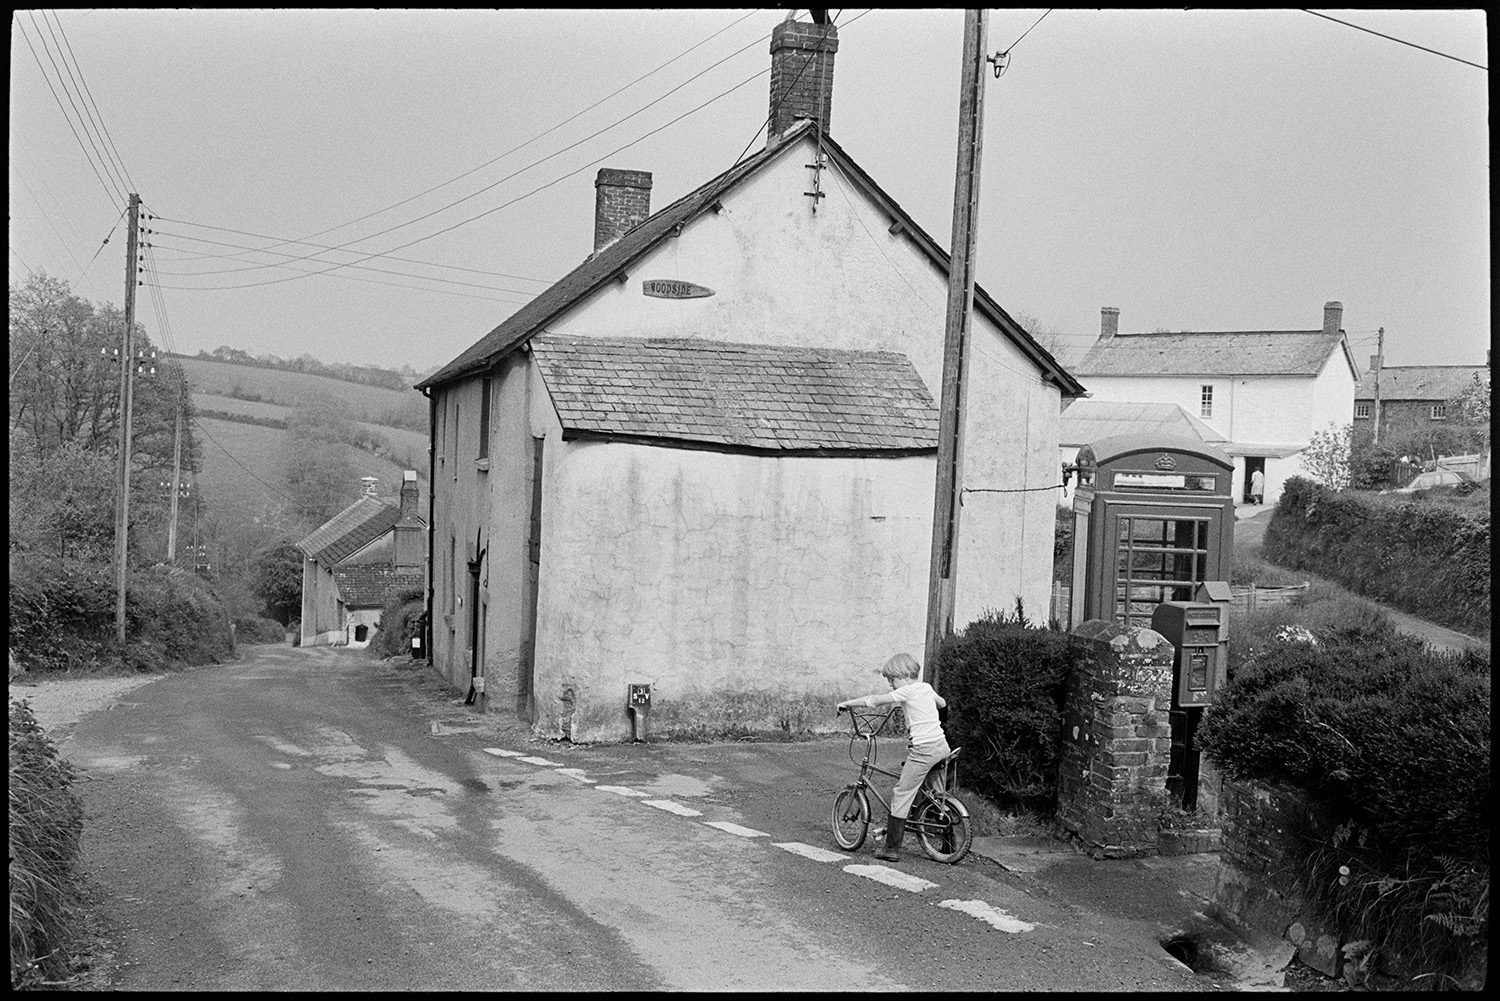 Street scene, child on bicycle. 
[A child riding a bicycle past a telephone box, post box and houses in Hollocombe.]